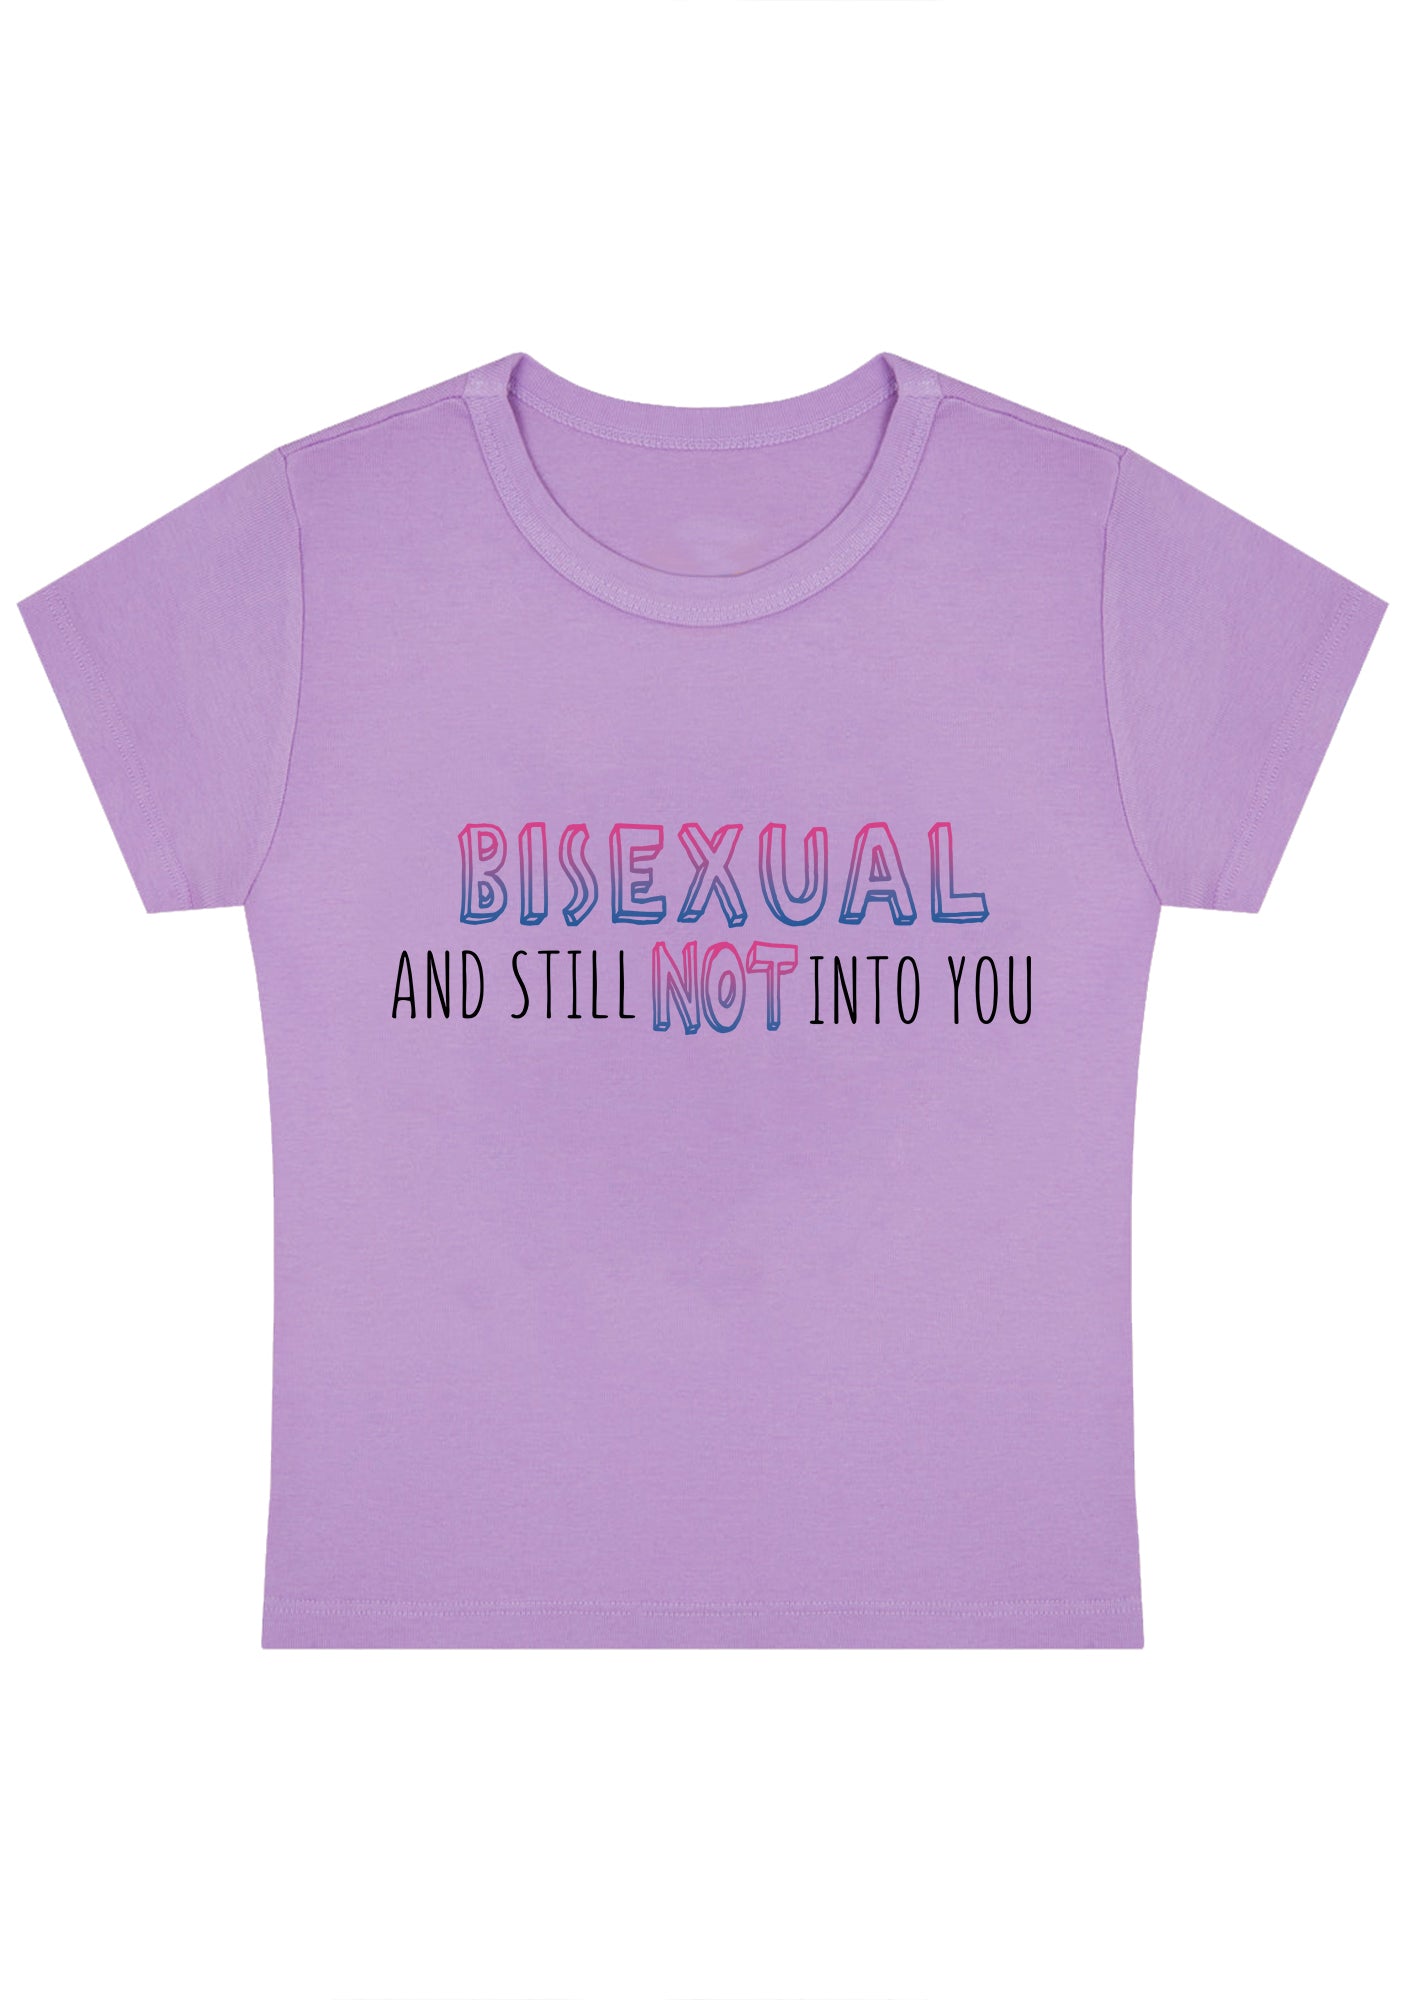 Bisexual And Still Not Into You Y2K Baby Tee